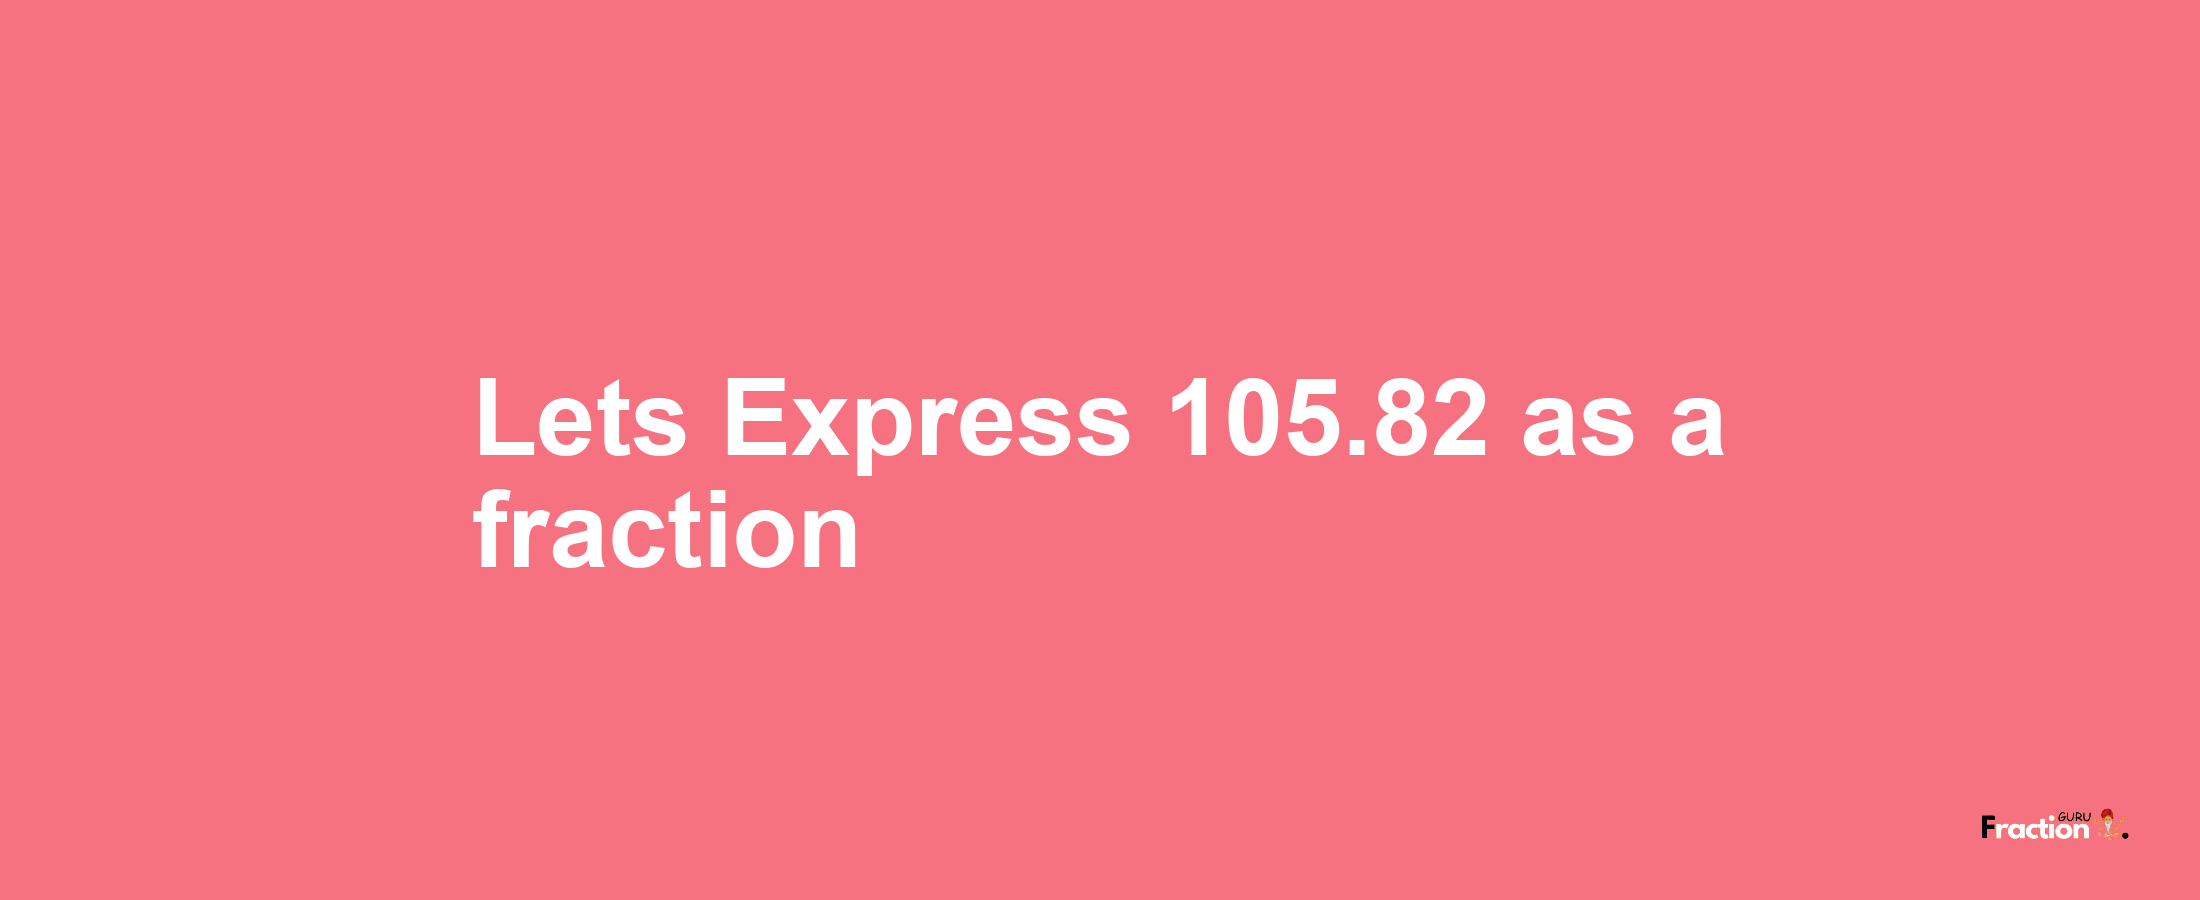 Lets Express 105.82 as afraction